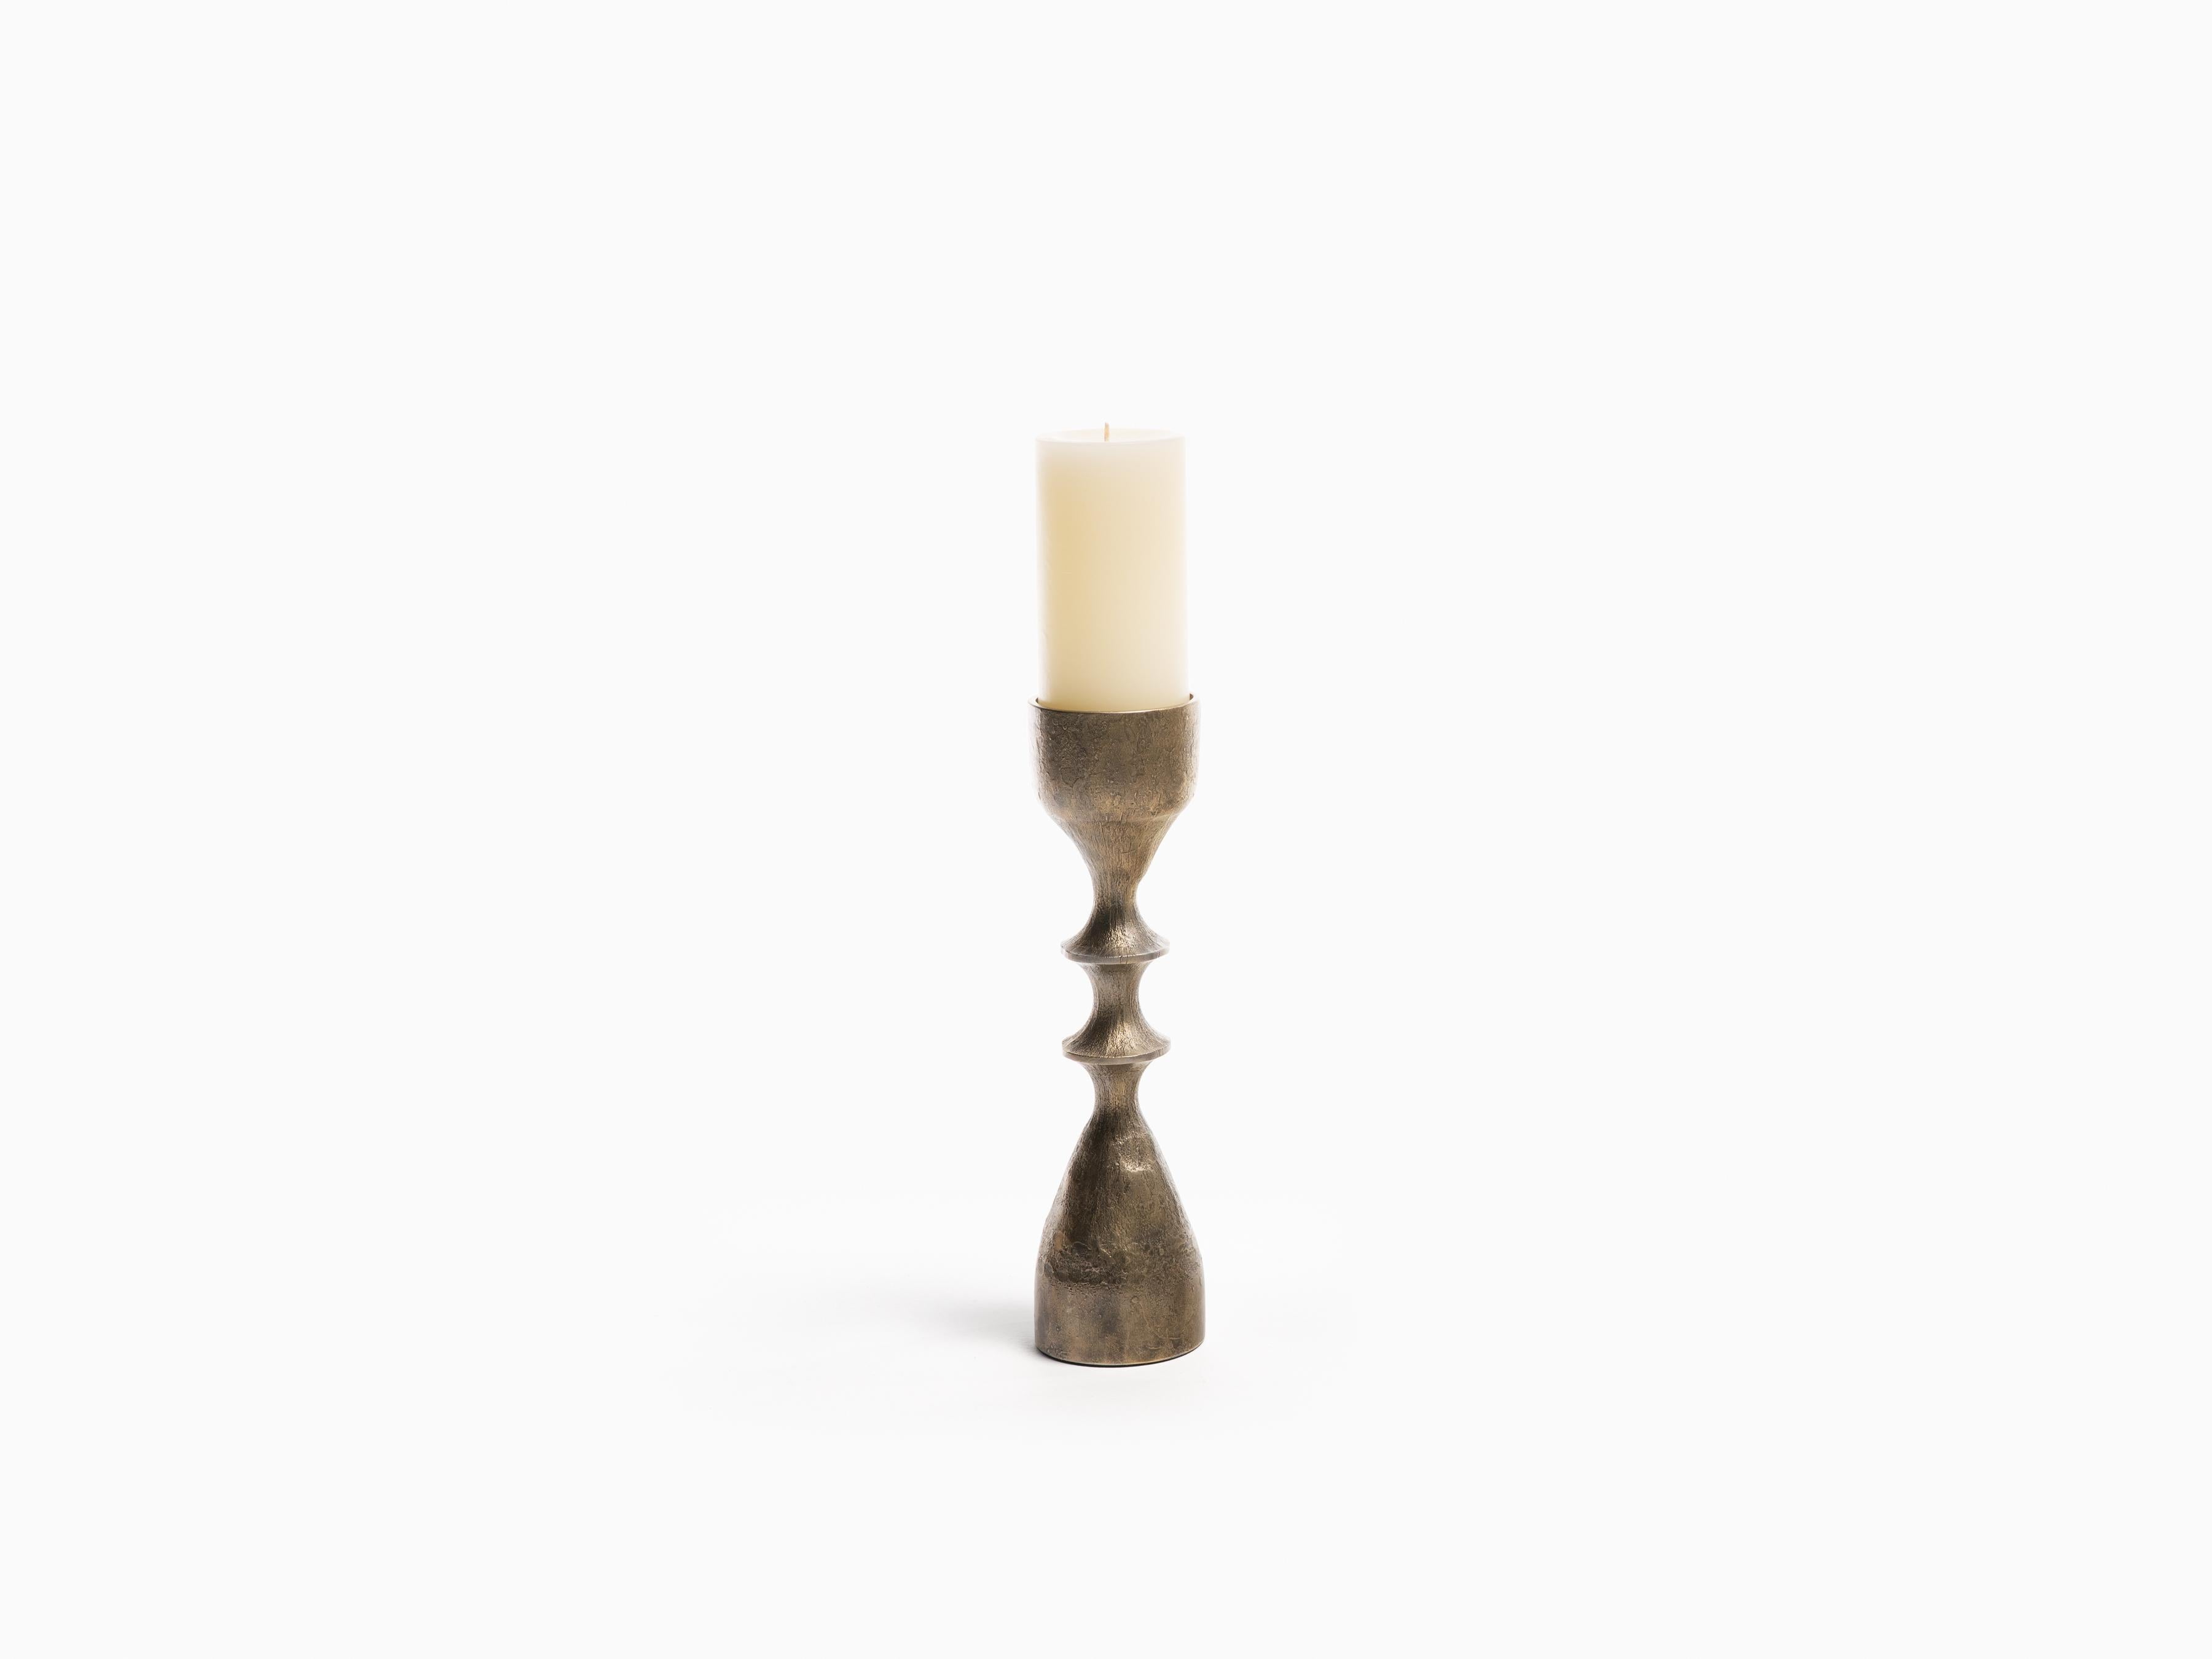 Whether they’re accessorized with candles or left nude as sculpture, the Vinca Candlesticks make a handsome addition to a bookcase, console, or end table. Arrange them in groups, or let their totemic forms stand on their own. > 2.75